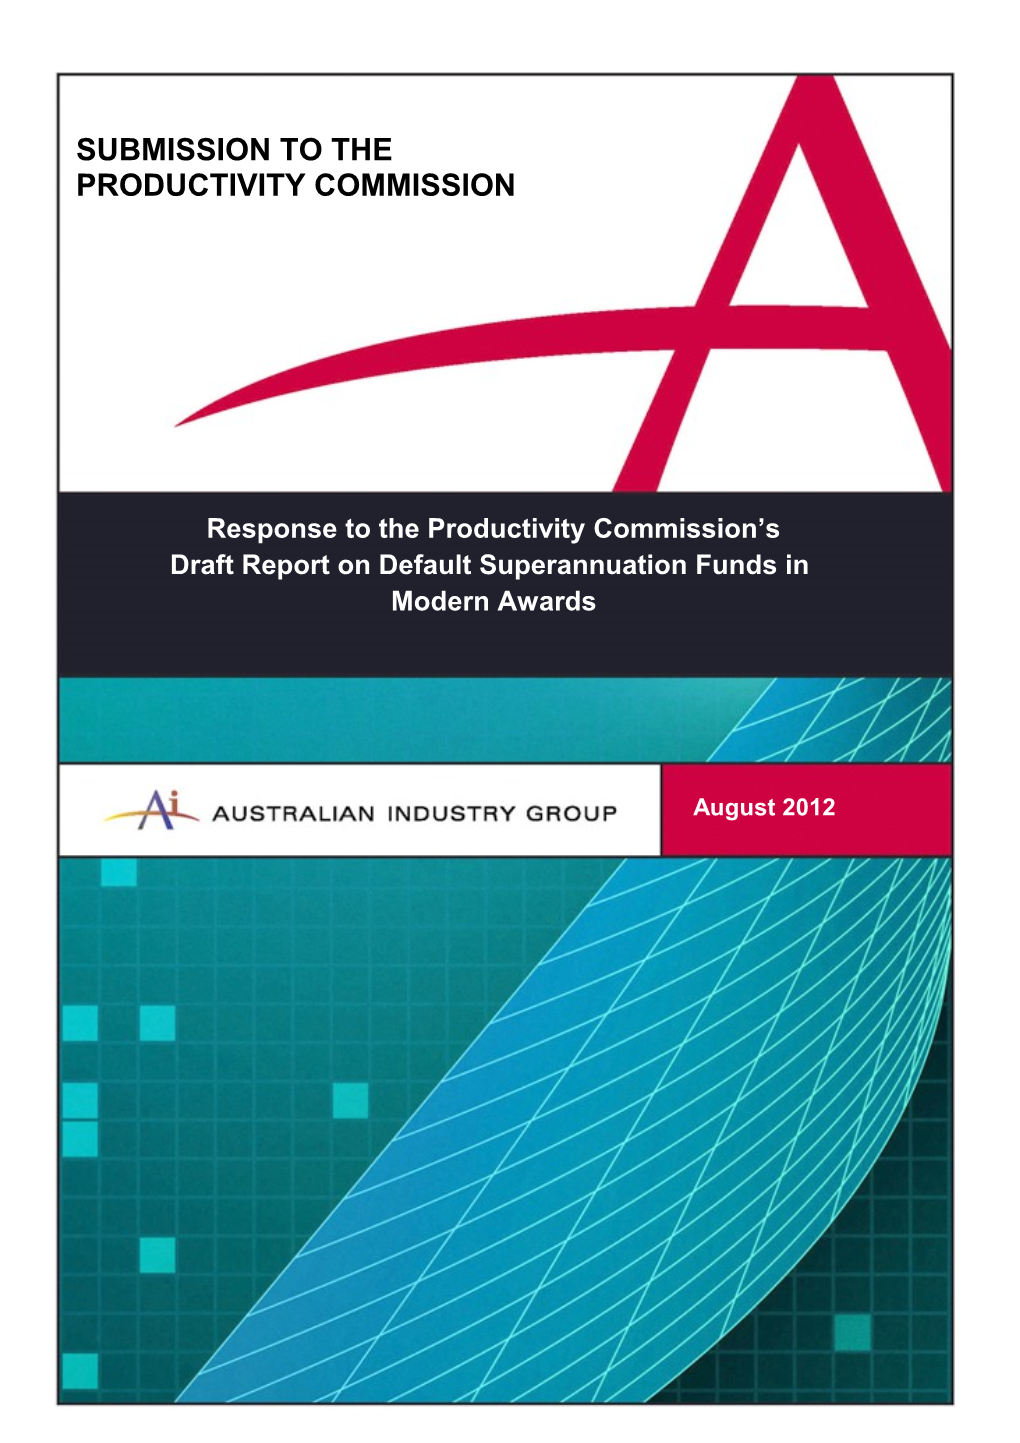 Submission DR79 - Australian Industry Group - Default Superannuation Funds in Modern Awards